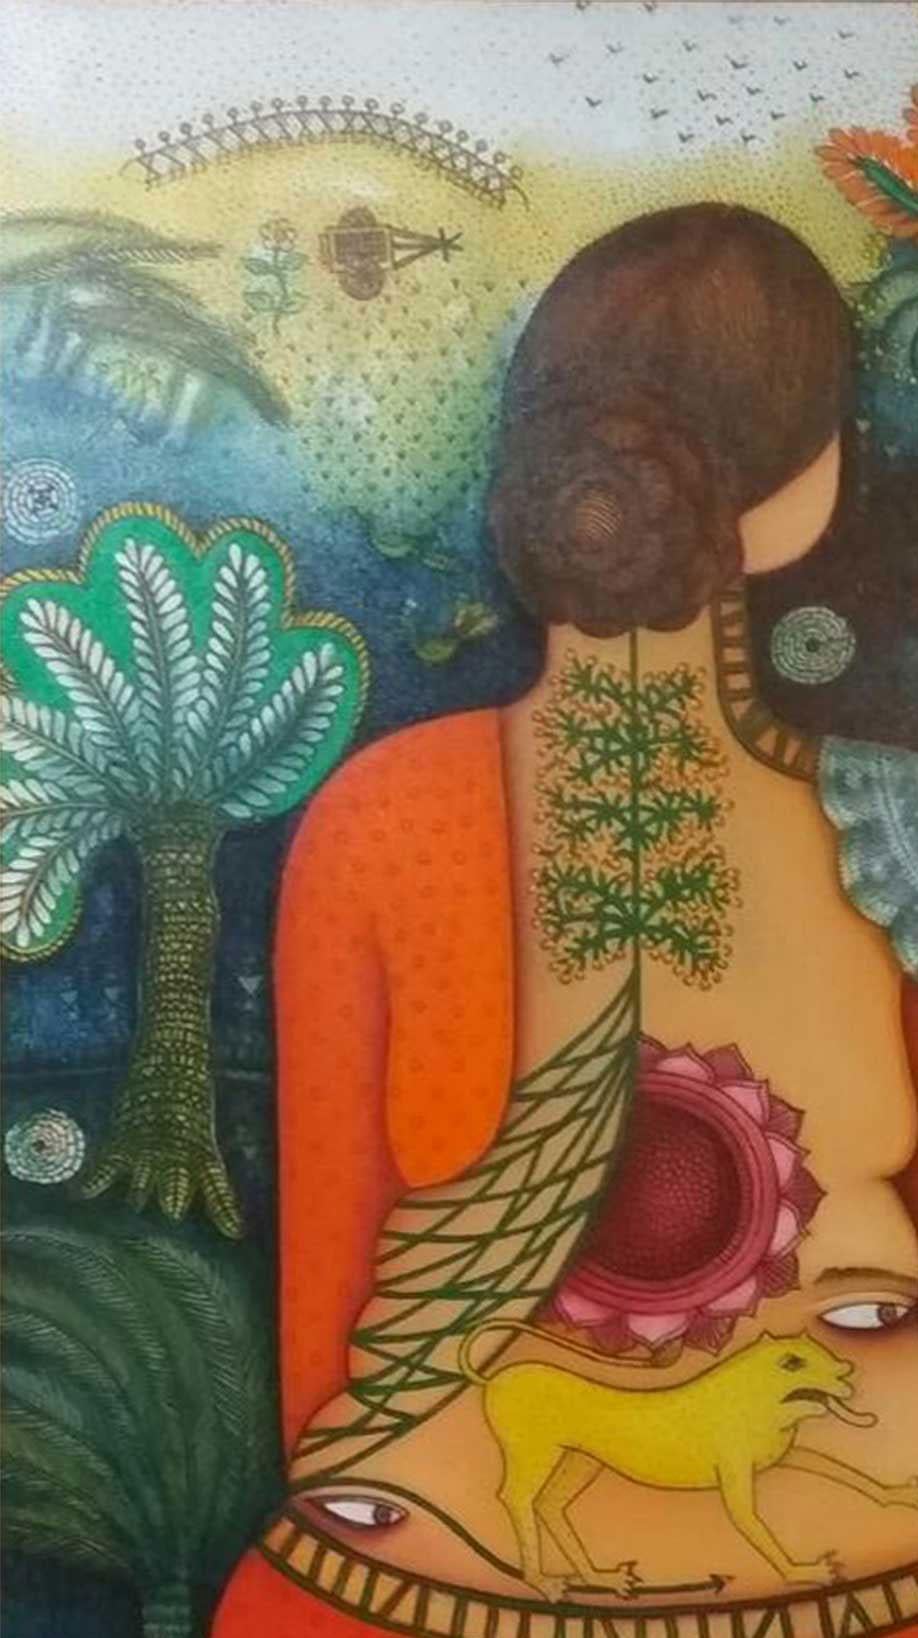 Shipra Bhattacharya  - She - 35 x 30 inches (unframed size)
Oil & Acrylic on canvas
Inclusive of shipment in a roll form.

Style : Shipra, is a leading contemporary mid career artist of India. Shipra Bhattacharya’s work has dealt with women’s issues